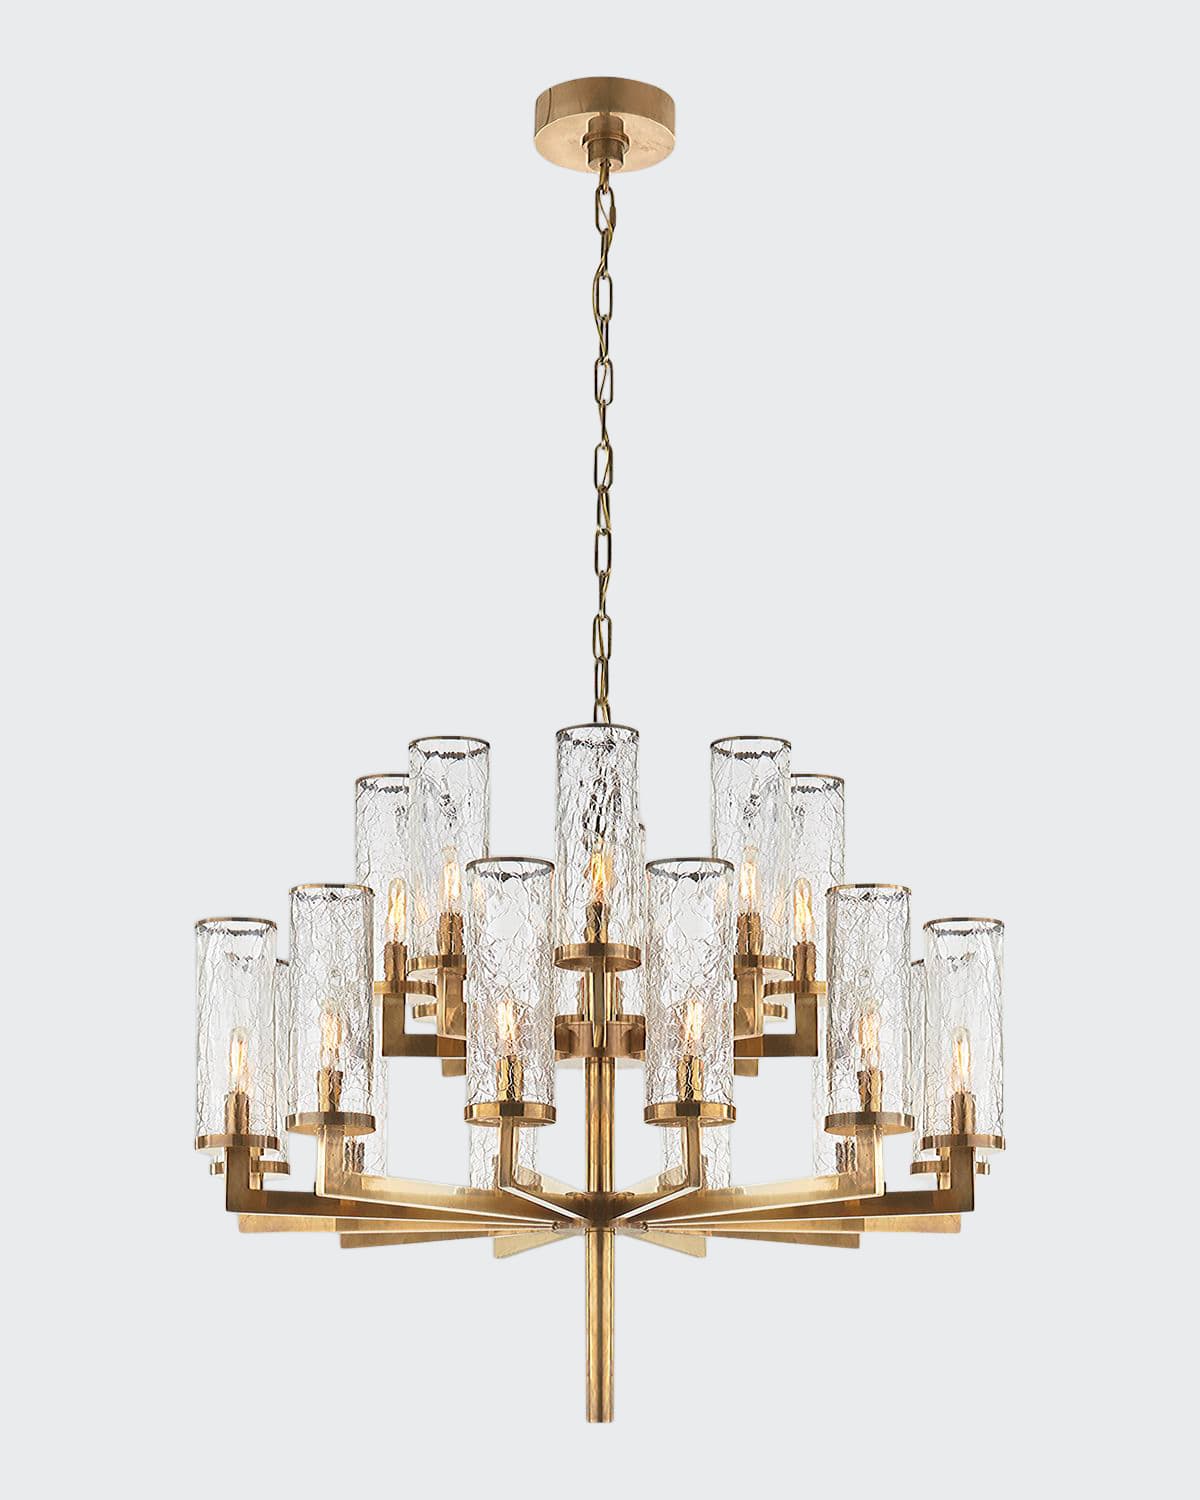 Kelly Wearstler For Visual Comfort Signature Liaison Double Tier Chandelier In Antique Brass